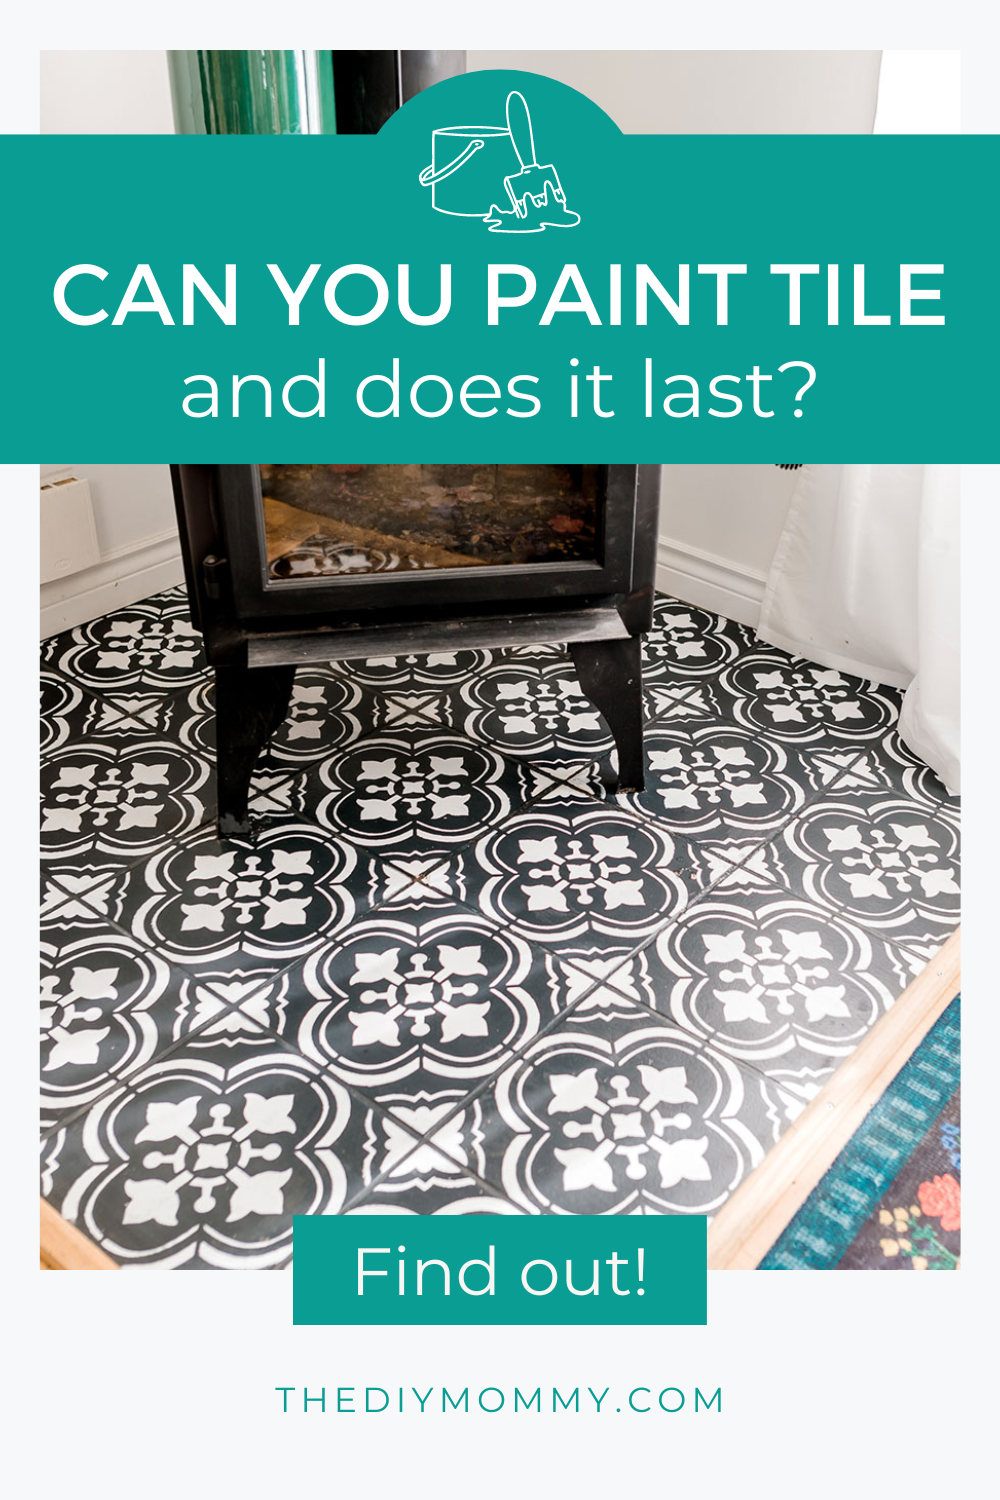 Can you paint tile and does it last?